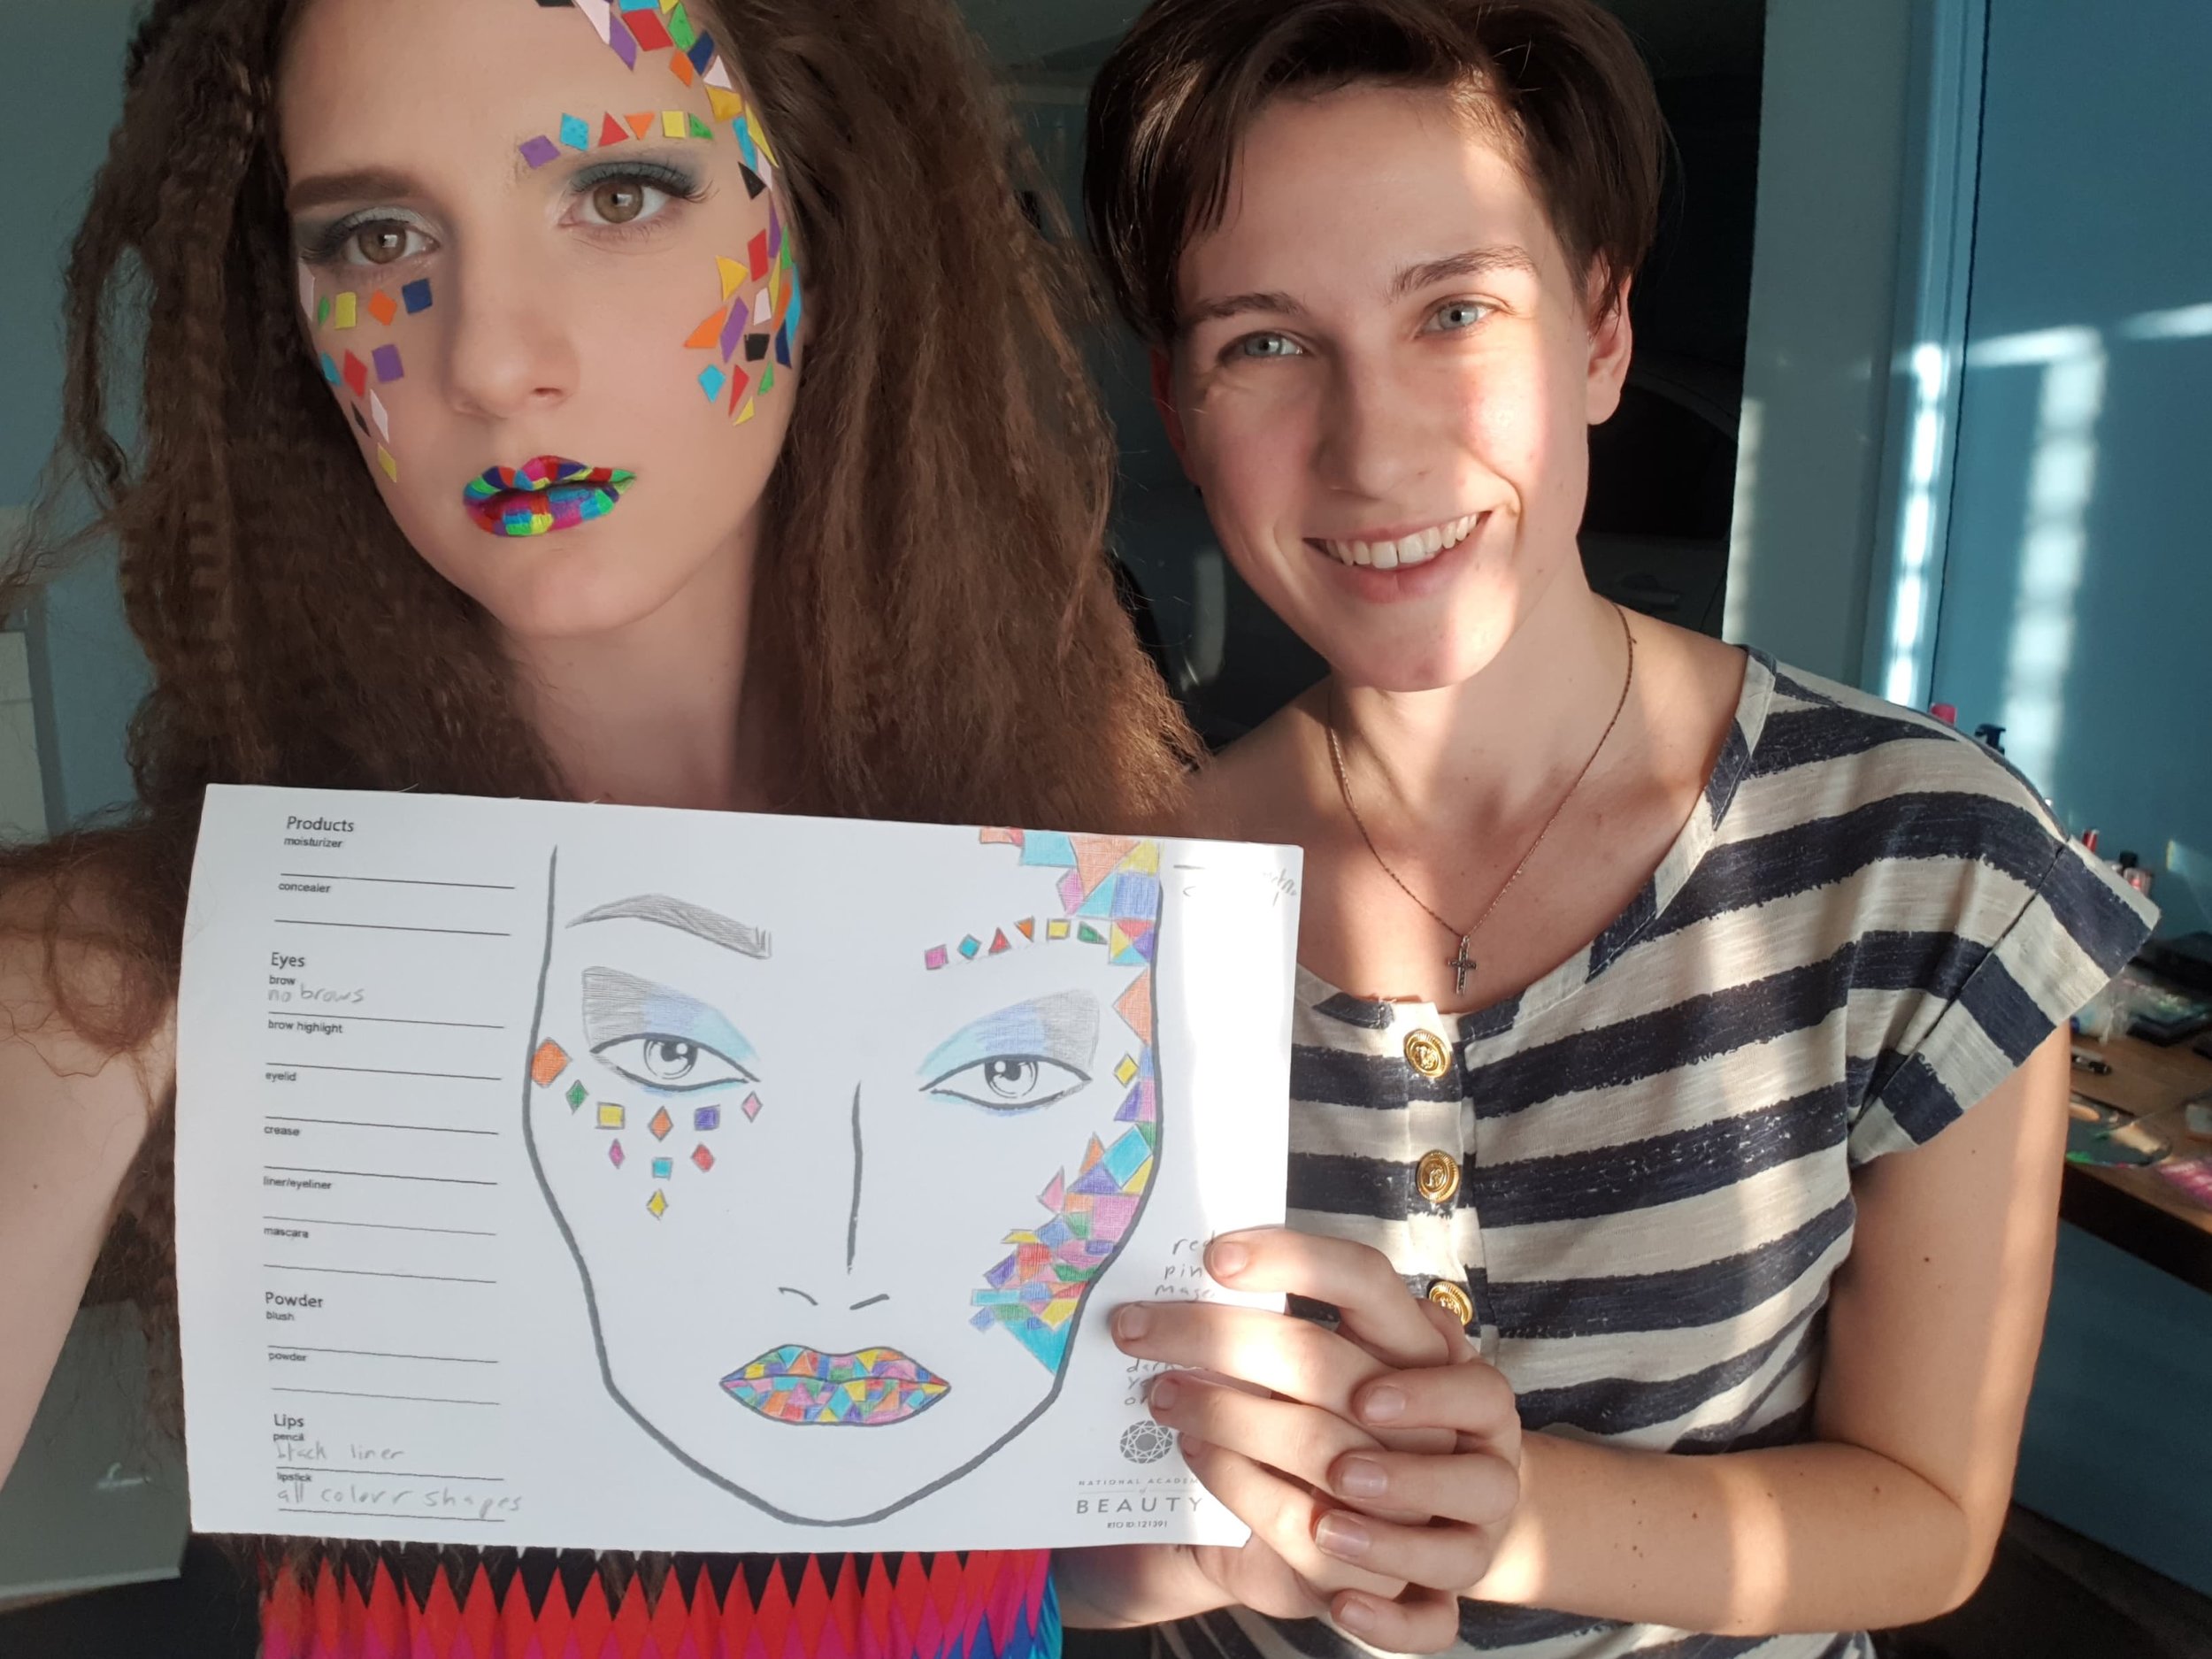 Selfie with the face chart